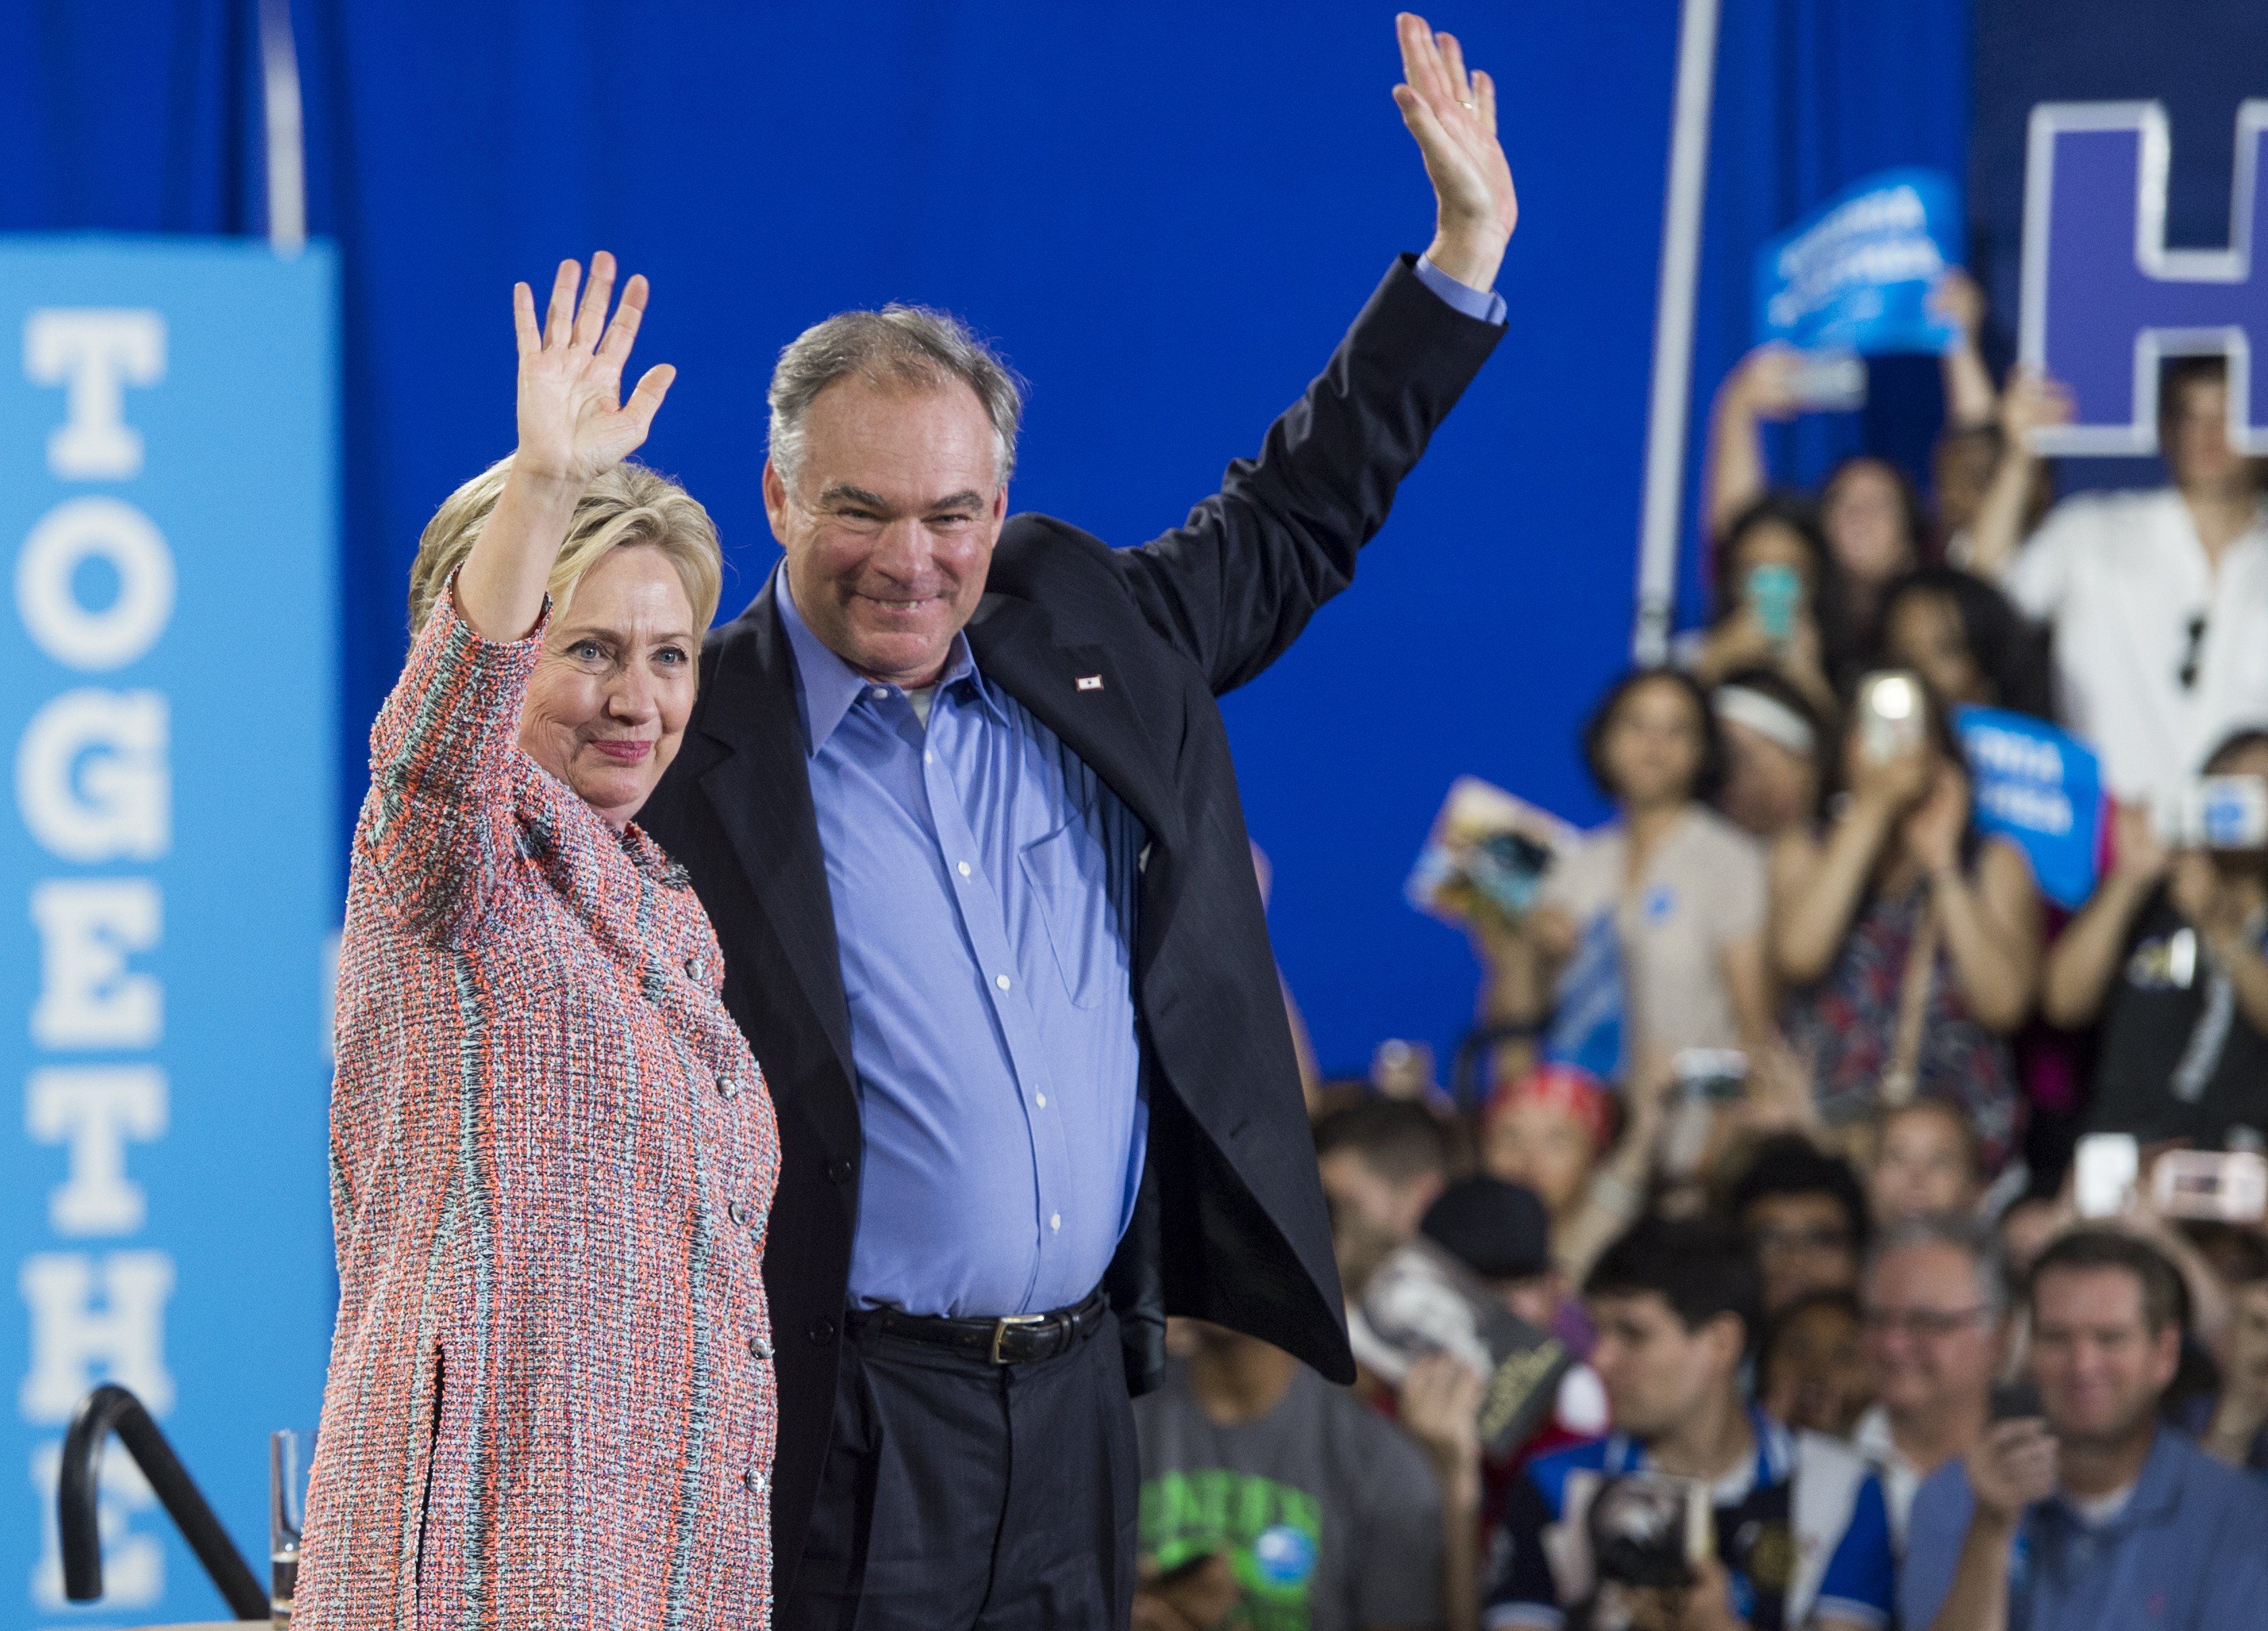 Hillary's Kaine choice is responsible